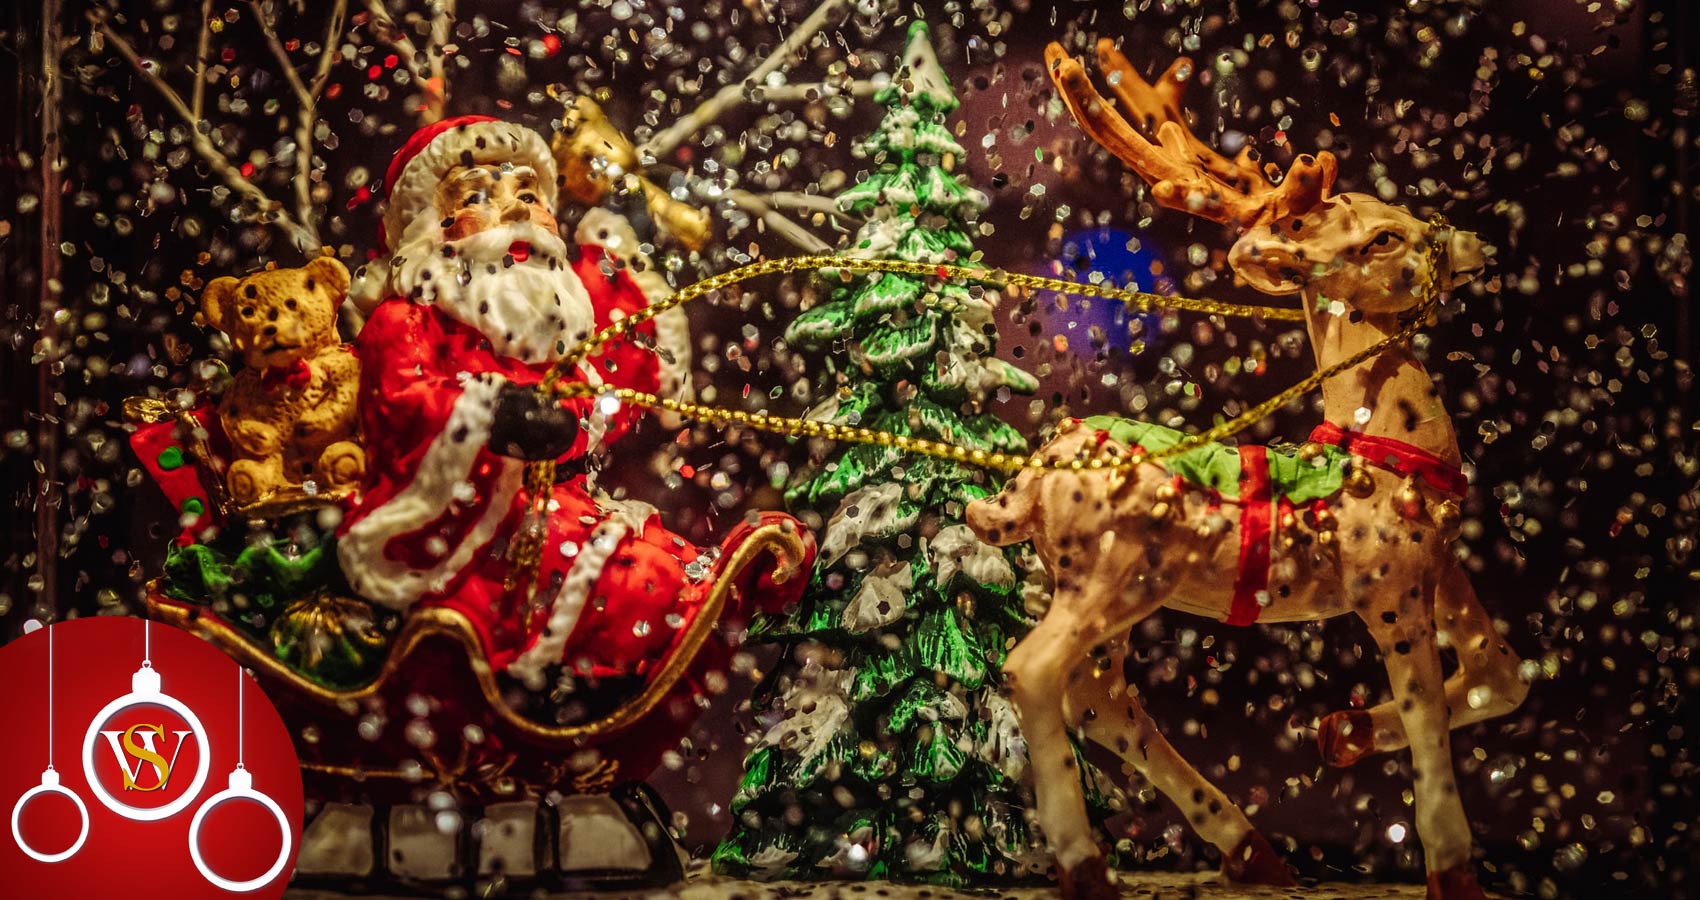 I Hear Sleigh Bells Ringing on Christmas Eve, a poem written by Christina Ciufo at Spillwords.com